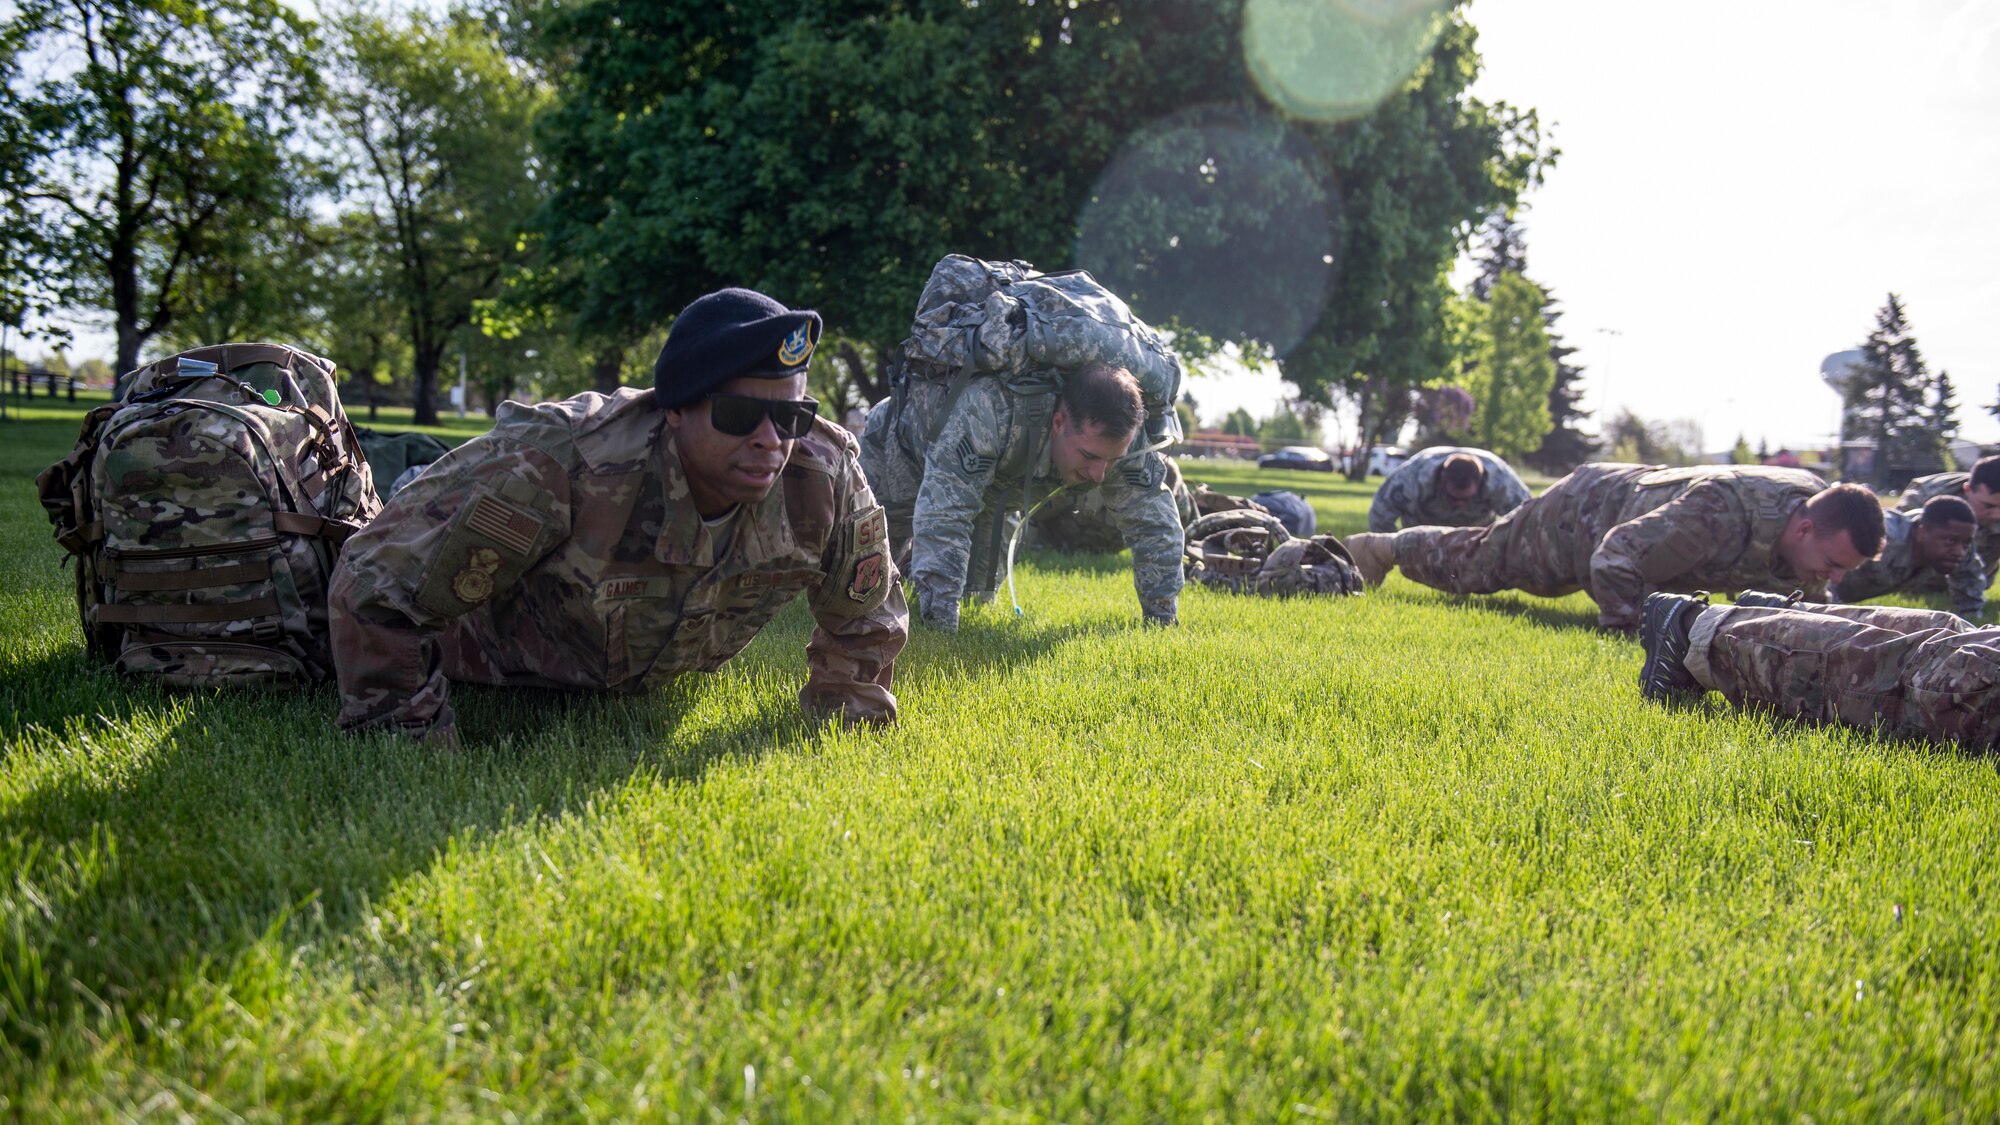 U.S. Air Force Staff Sgt. Kenny Gainey, 141st Security Forces readiness trainer, executes push-ups in honor of each defender who has lost their life in the line of duty since 9/11, during National Police Week at Fairchild Air Force Base, Washington, May 13, 2019. The 92nd SFS hosted numerous events for Team Fairchild to enjoy, including a Ruck and Run, a Memorial Retreat Ceremony and a kid-friendly Law Enforcement Exposition. (U.S. Air Force photo by Airman 1st Class Whitney Laine)